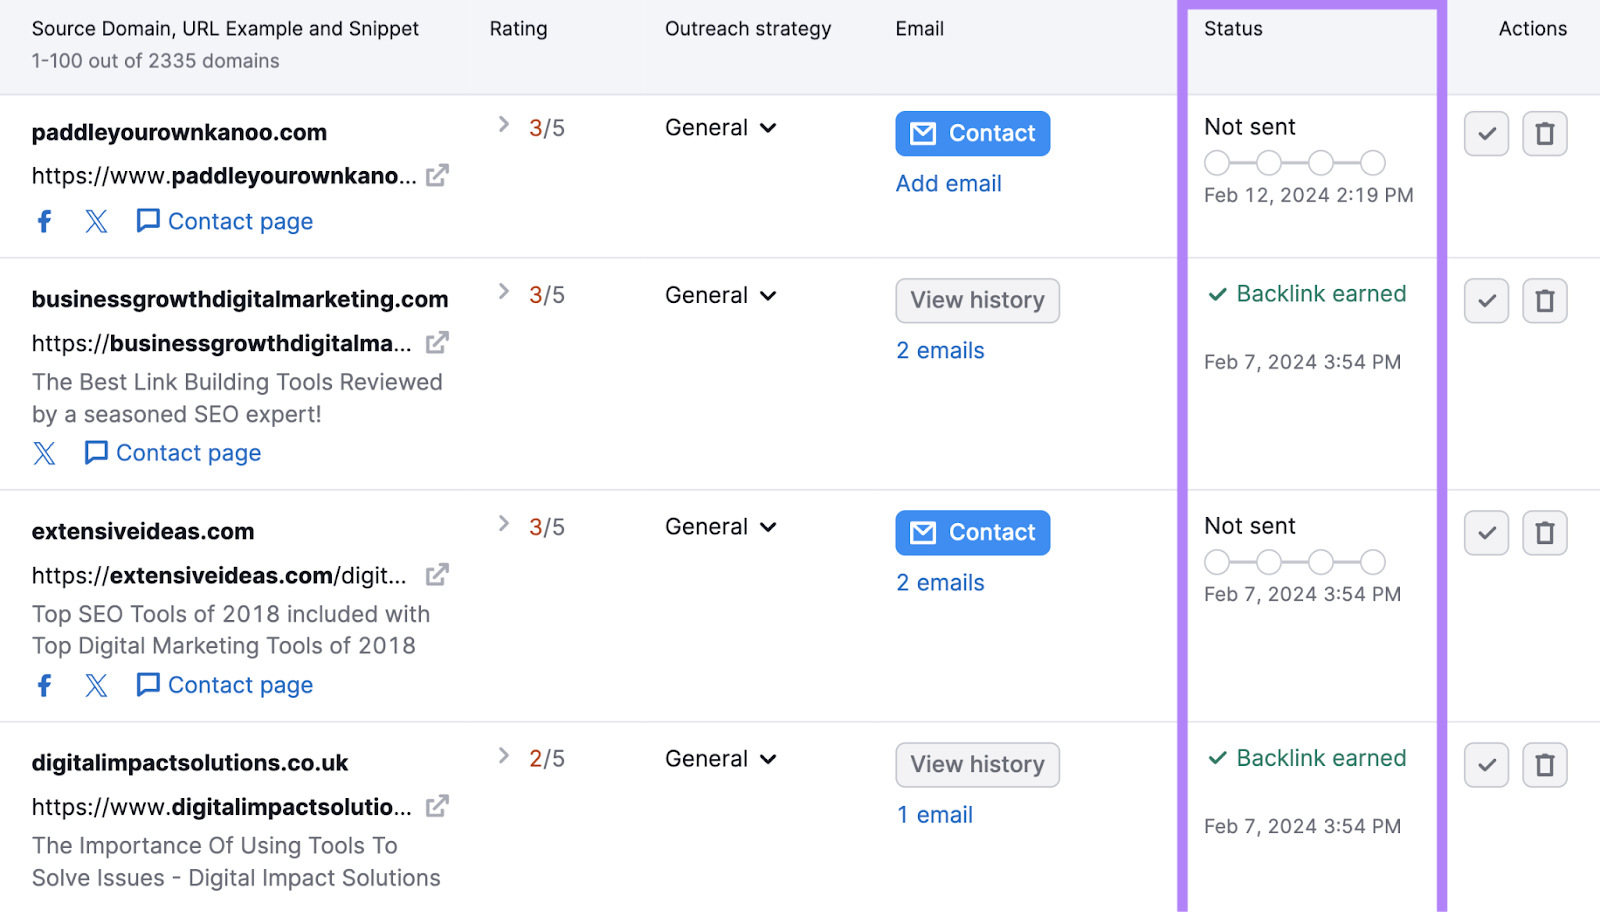 Monitor emails in the "Status" column in Link Building Tool